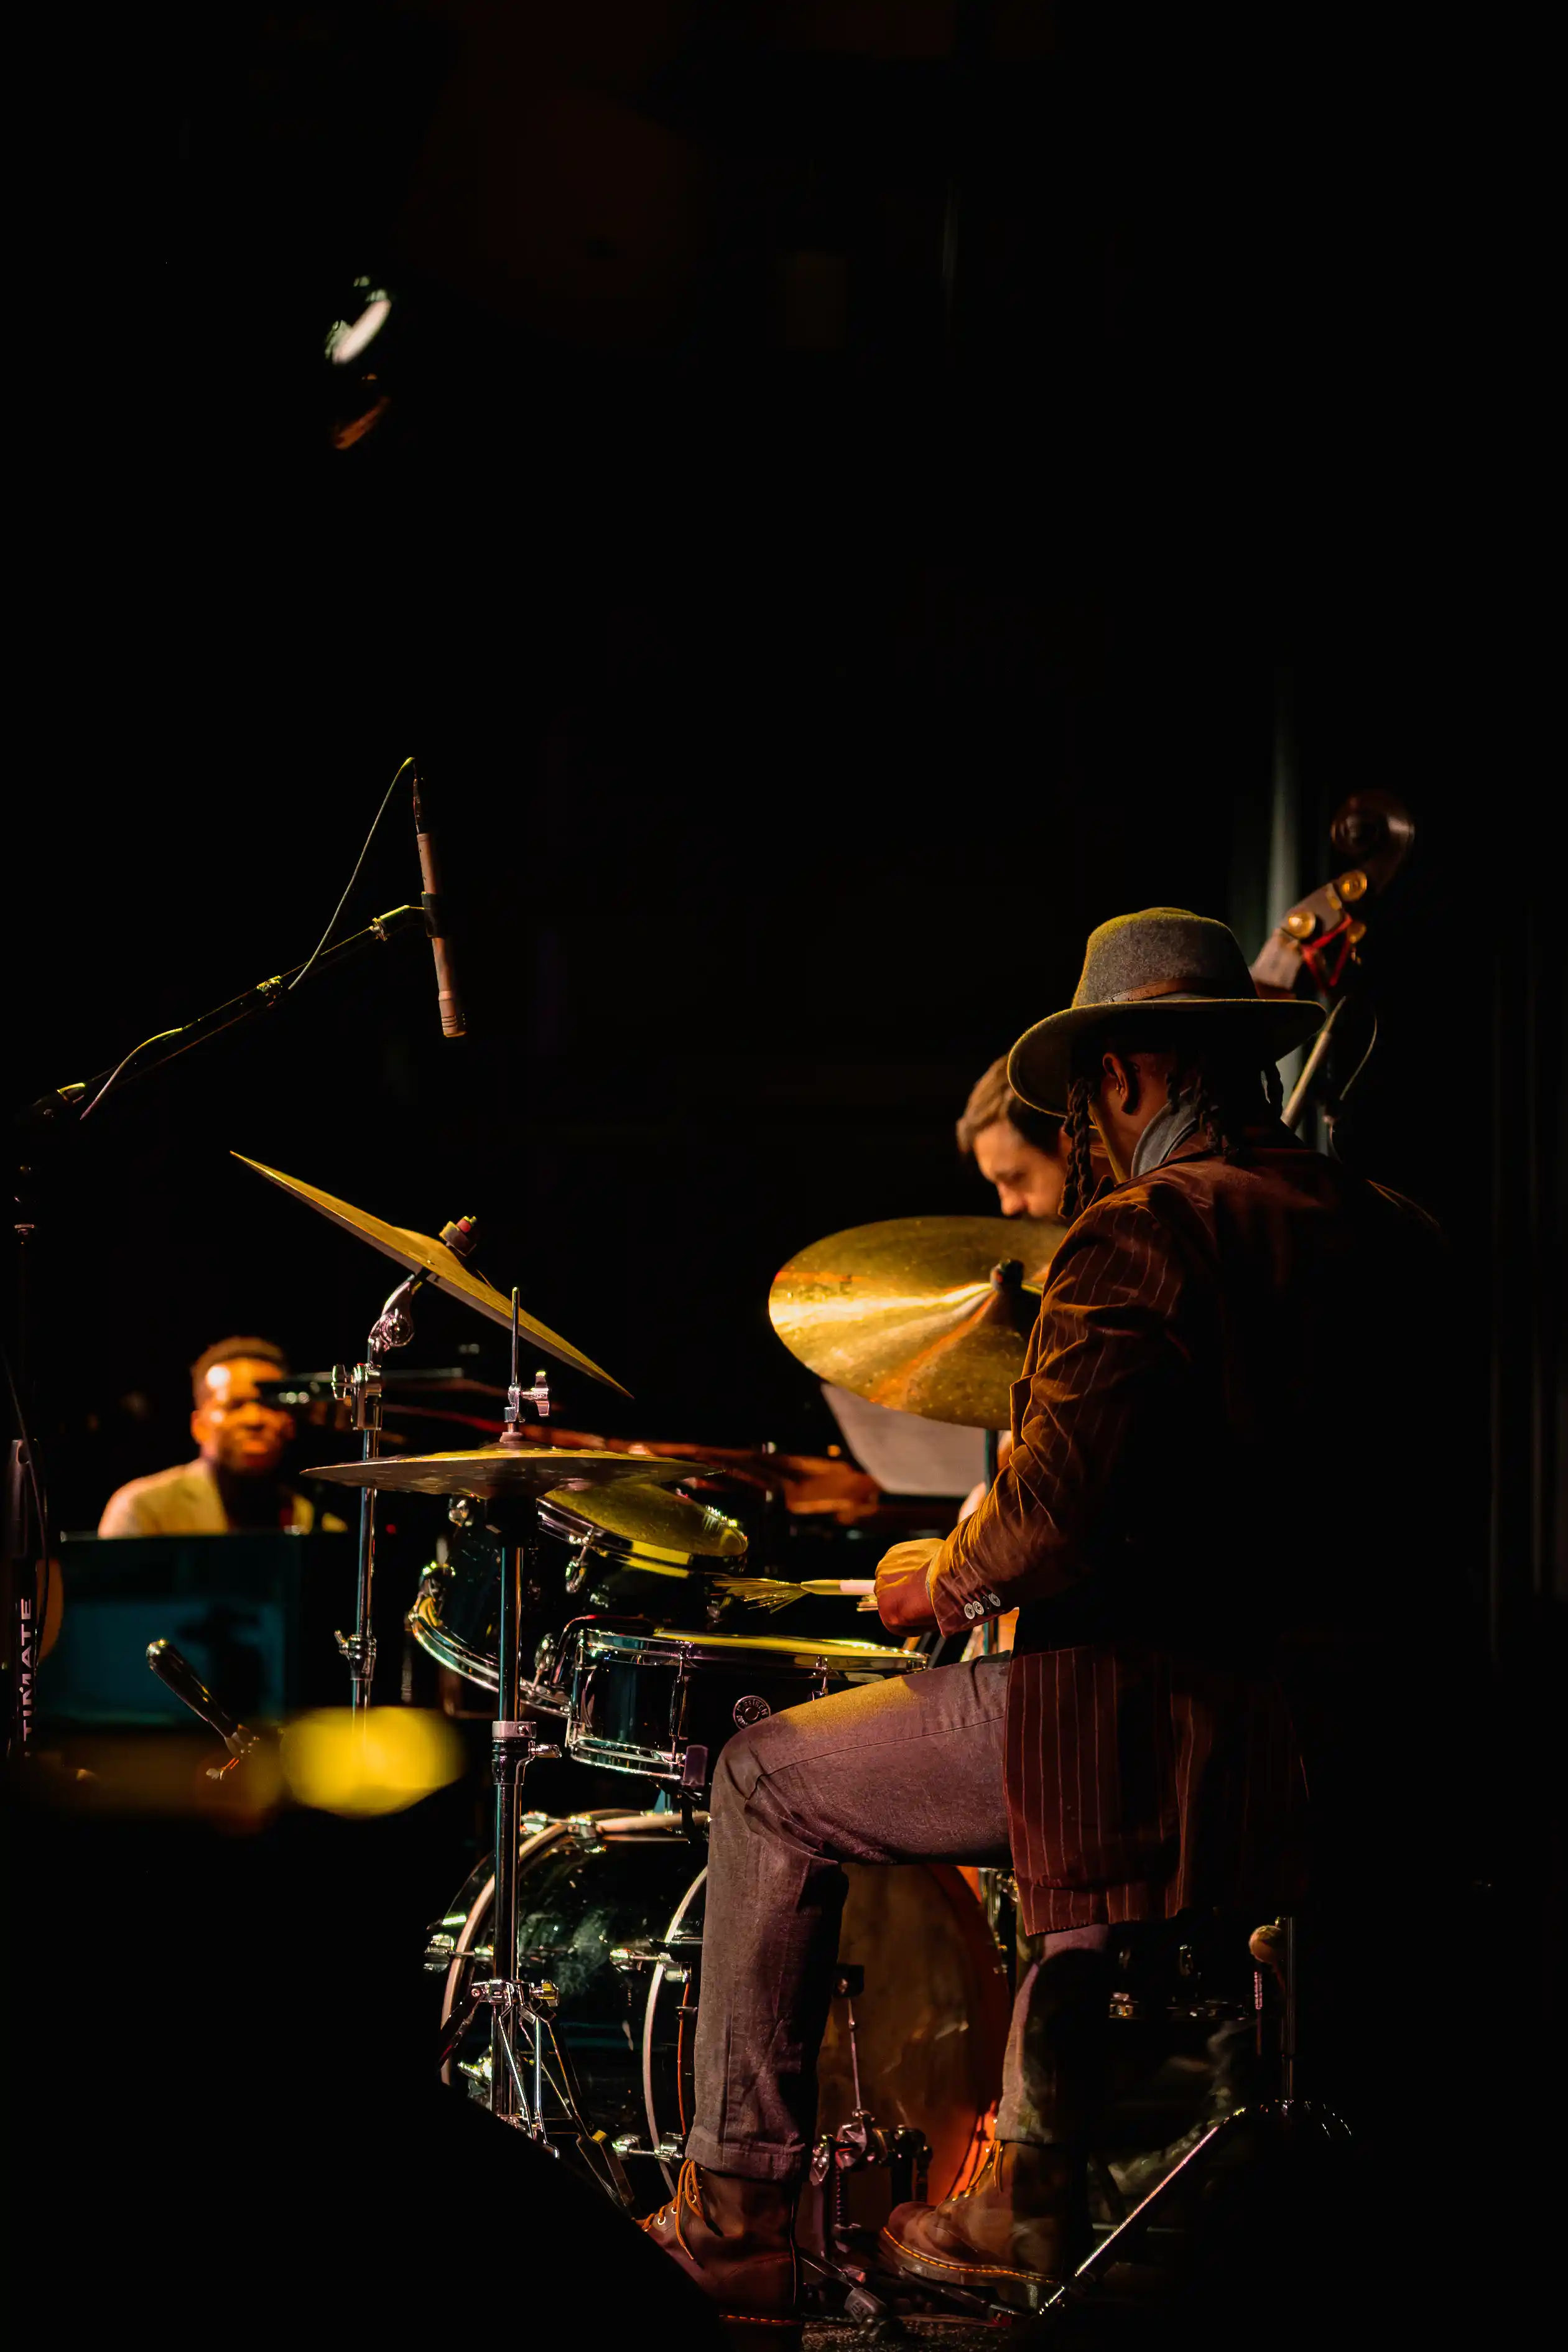 A musician sitting and playing the cello on a dark stage with a drummer in the background.